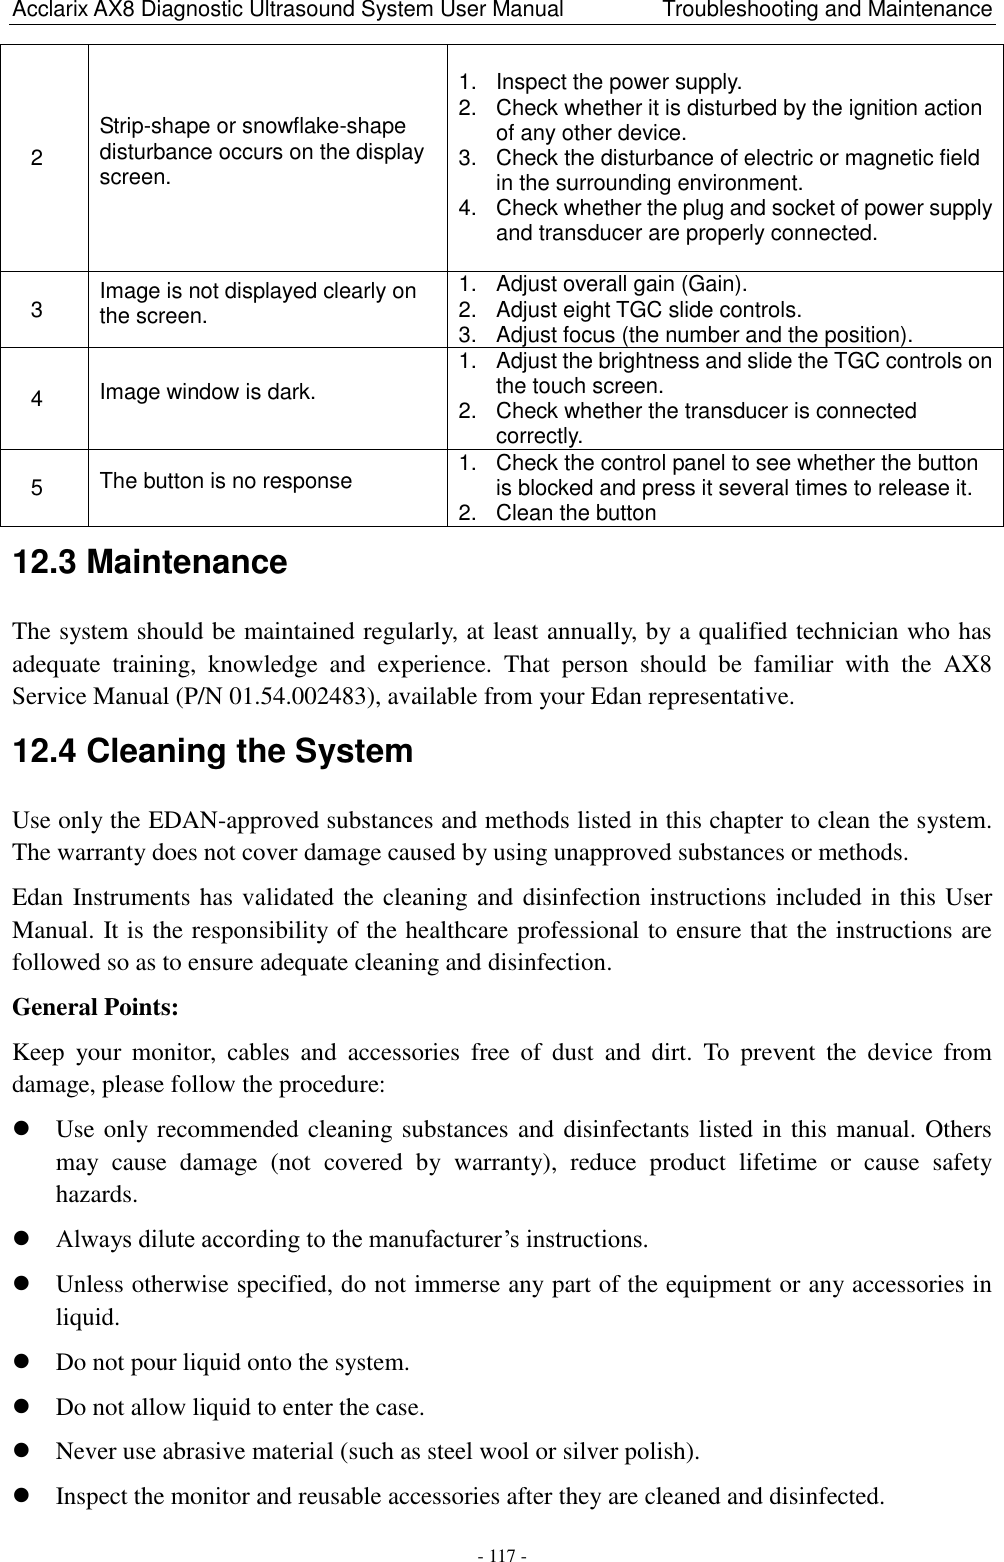 Acclarix AX8 Diagnostic Ultrasound System User Manual                  Troubleshooting and Maintenance - 117 - 12.3 Maintenance The system should be maintained regularly, at least annually, by a qualified technician who has adequate  training,  knowledge  and  experience.  That  person  should  be  familiar  with  the  AX8 Service Manual (P/N 01.54.002483), available from your Edan representative. 12.4 Cleaning the System Use only the EDAN-approved substances and methods listed in this chapter to clean the system. The warranty does not cover damage caused by using unapproved substances or methods. Edan Instruments has validated the cleaning and disinfection instructions included in this User Manual. It is the responsibility of the healthcare professional to ensure that the instructions are followed so as to ensure adequate cleaning and disinfection. General Points: Keep  your  monitor,  cables  and  accessories  free  of  dust  and  dirt.  To  prevent  the  device  from damage, please follow the procedure:    Use only recommended cleaning substances and disinfectants listed in this manual. Others may  cause  damage  (not  covered  by  warranty),  reduce  product  lifetime  or  cause  safety hazards.  Always dilute according to the manufacturer‟s instructions.  Unless otherwise specified, do not immerse any part of the equipment or any accessories in liquid.  Do not pour liquid onto the system.  Do not allow liquid to enter the case.  Never use abrasive material (such as steel wool or silver polish).  Inspect the monitor and reusable accessories after they are cleaned and disinfected. 2   Strip-shape or snowflake-shape disturbance occurs on the display screen. 1.  Inspect the power supply. 2.  Check whether it is disturbed by the ignition action of any other device. 3.  Check the disturbance of electric or magnetic field in the surrounding environment. 4.  Check whether the plug and socket of power supply and transducer are properly connected.   3   Image is not displayed clearly on the screen. 1.  Adjust overall gain (Gain). 2.  Adjust eight TGC slide controls. 3.  Adjust focus (the number and the position). 4   Image window is dark. 1.  Adjust the brightness and slide the TGC controls on the touch screen. 2.  Check whether the transducer is connected correctly. 5   The button is no response 1.  Check the control panel to see whether the button is blocked and press it several times to release it. 2.  Clean the button 